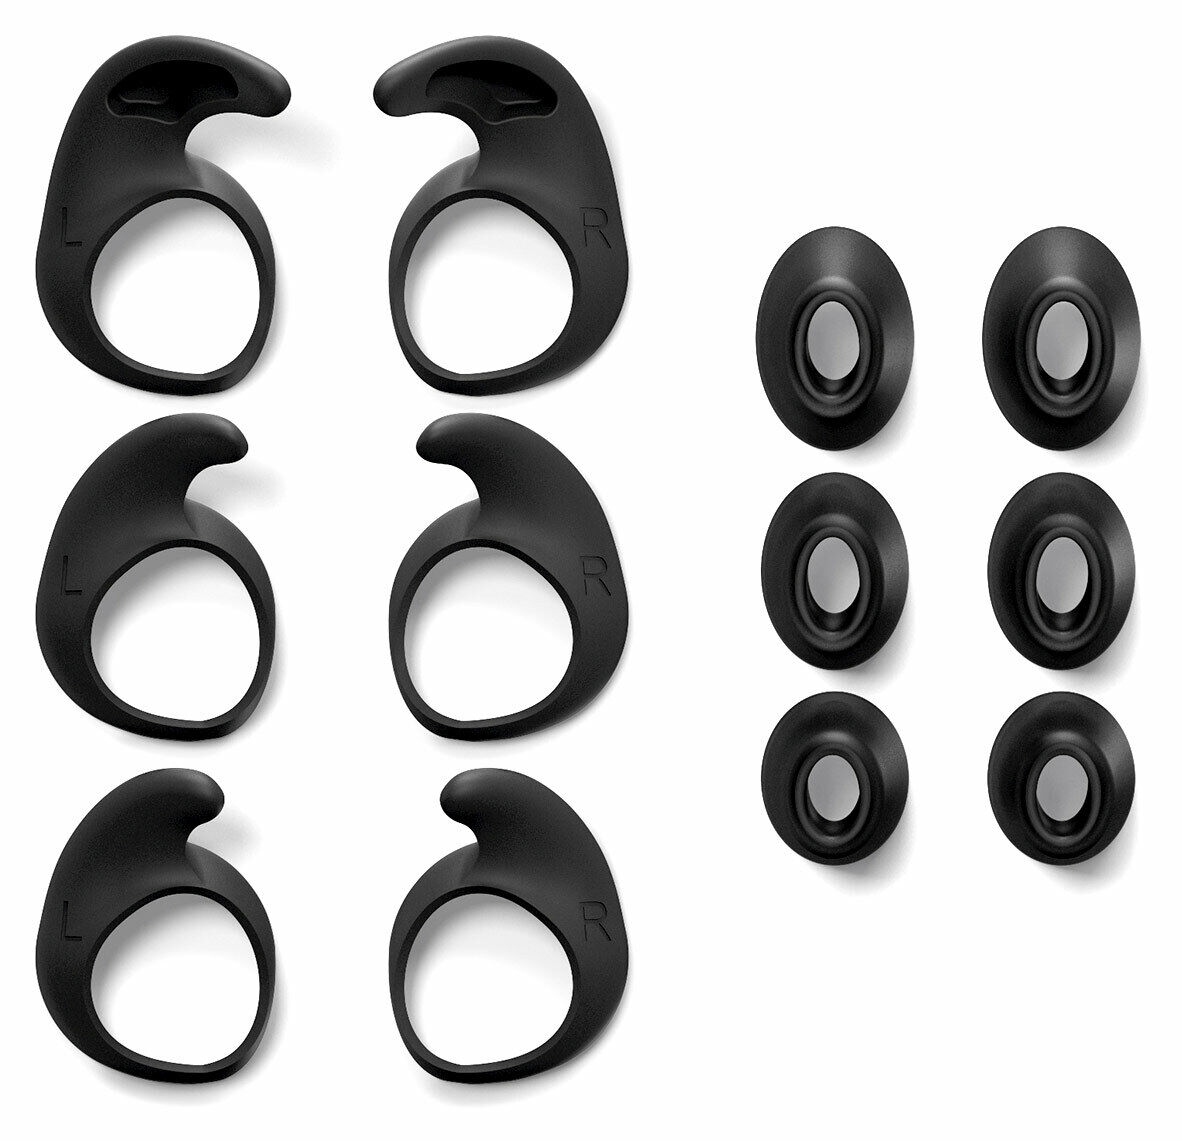 JA-14101-76 Accessory pack for the Jabra Evolve 65e with 3 pairs of EarGels in 3 sizes (S, M and L) and 3 pairs of EarWings (S, M and L).